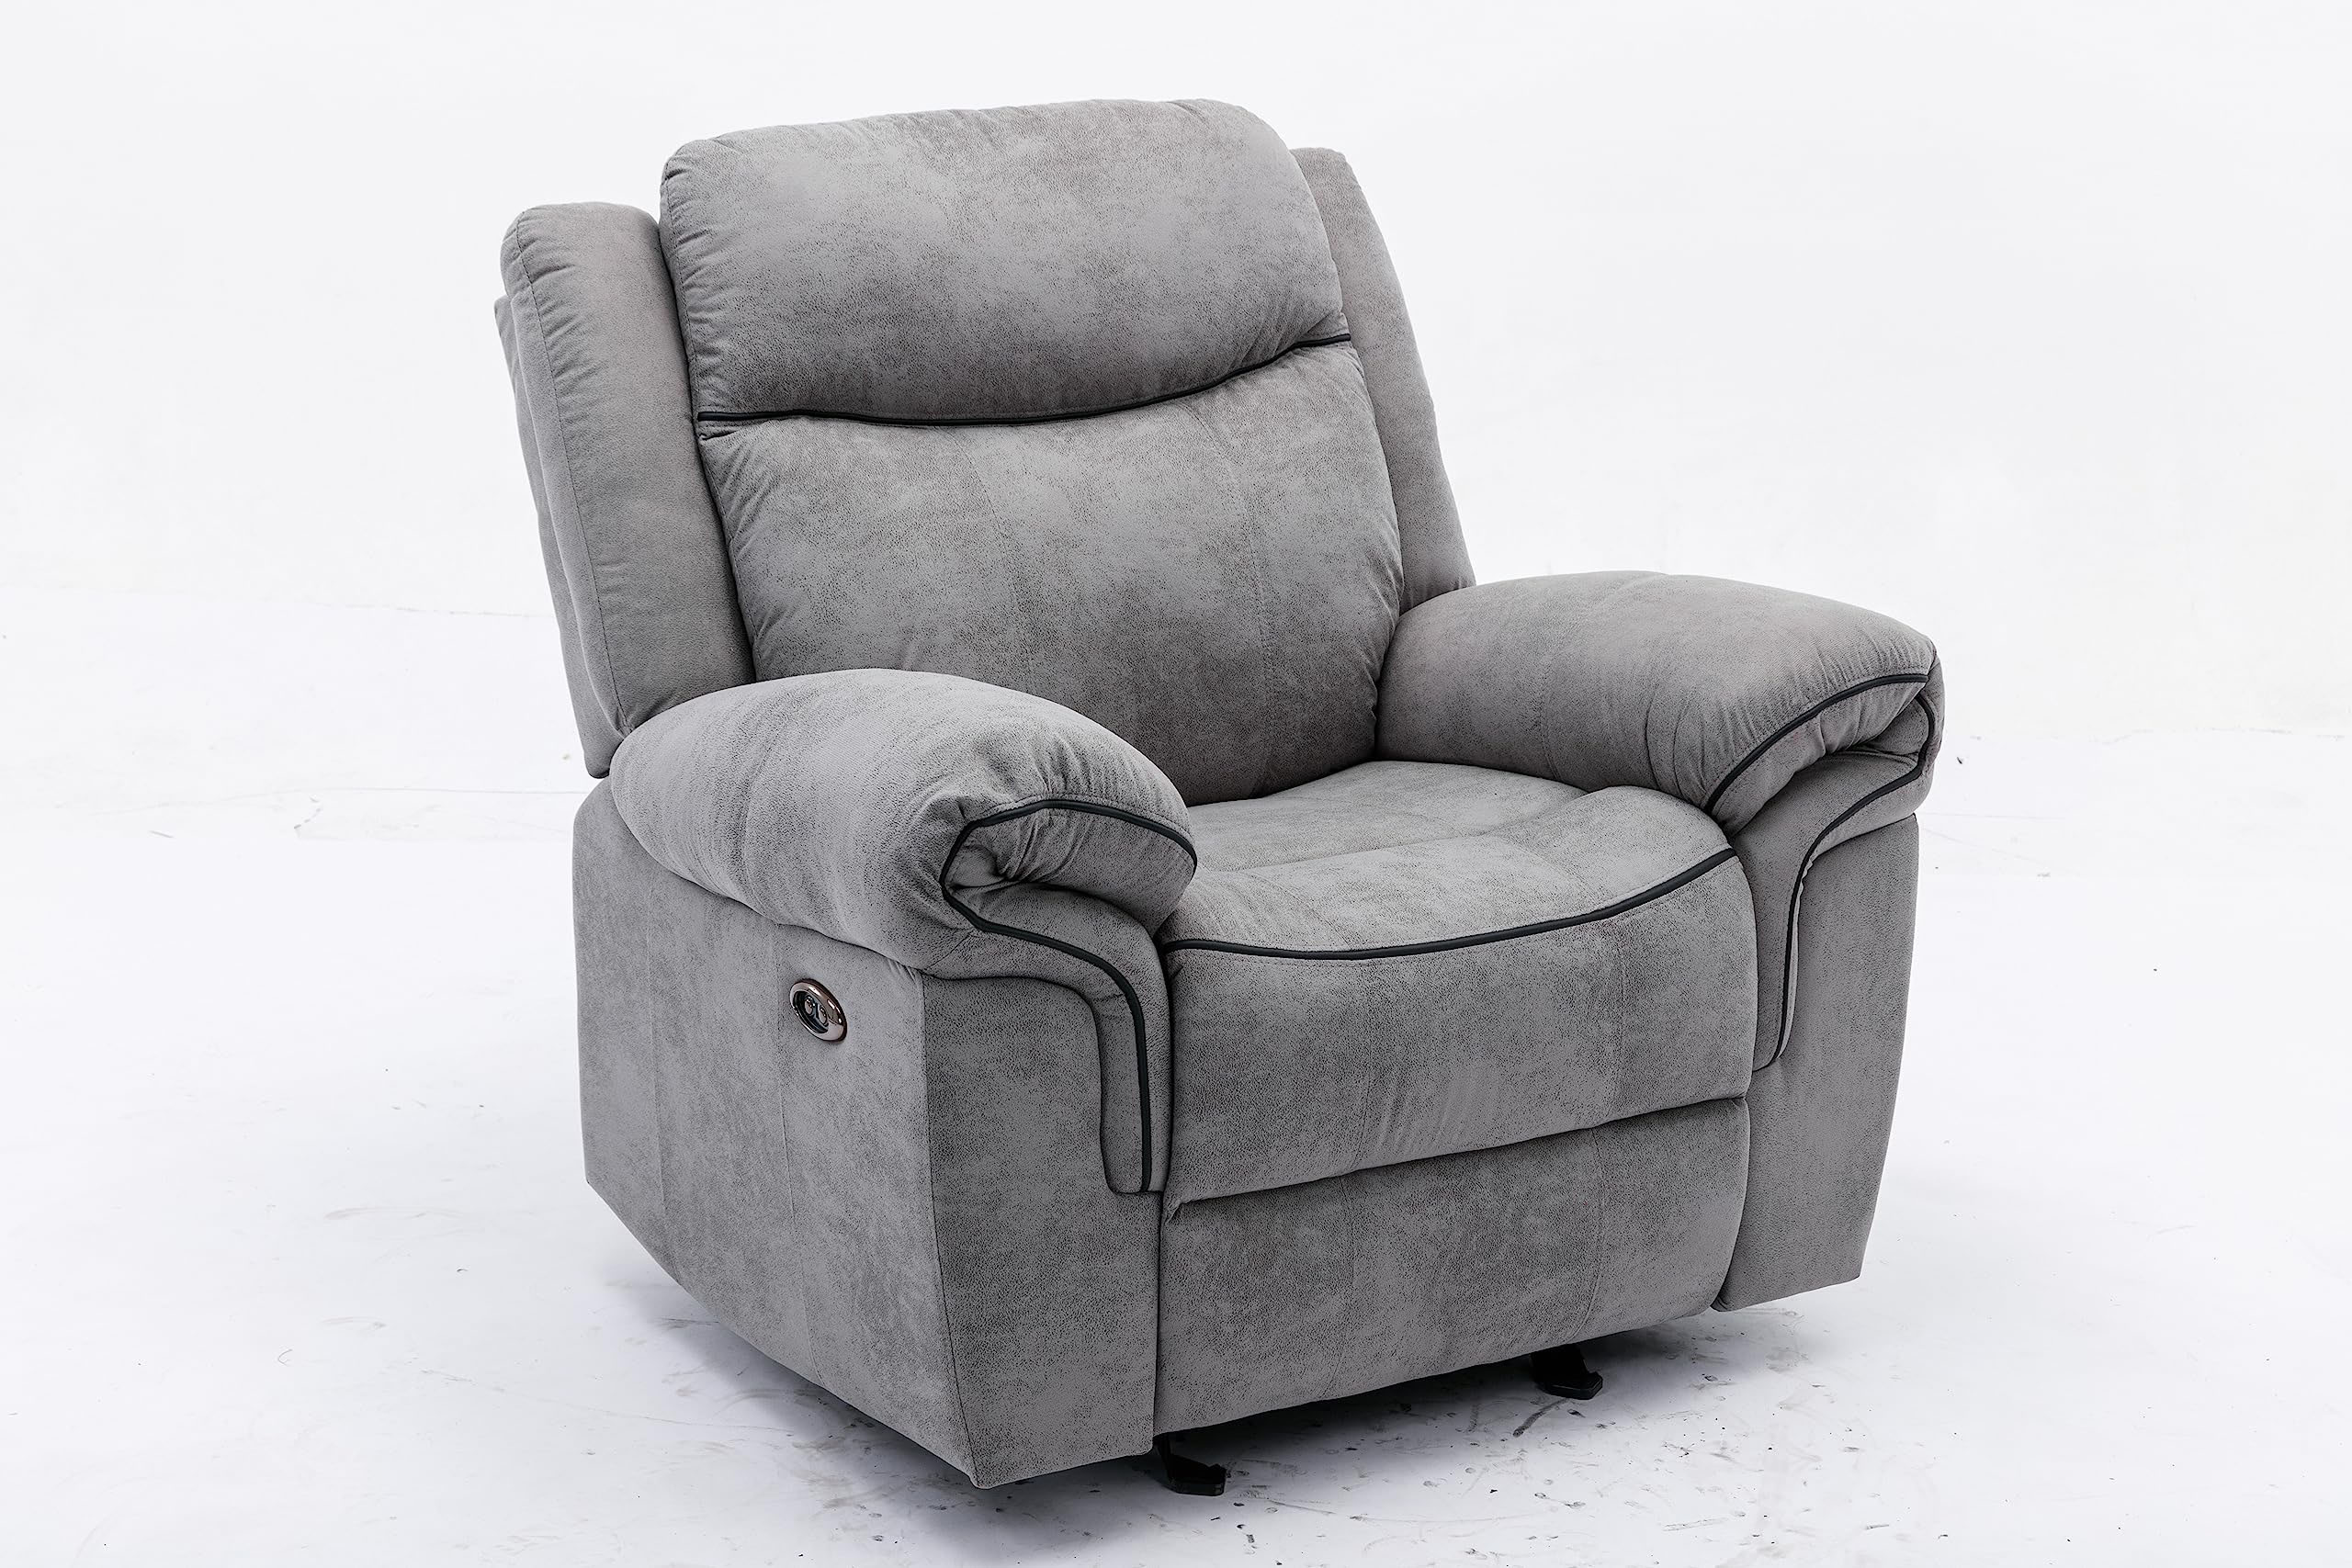 Sanora Electric Recliner Faux Leather Sofa6